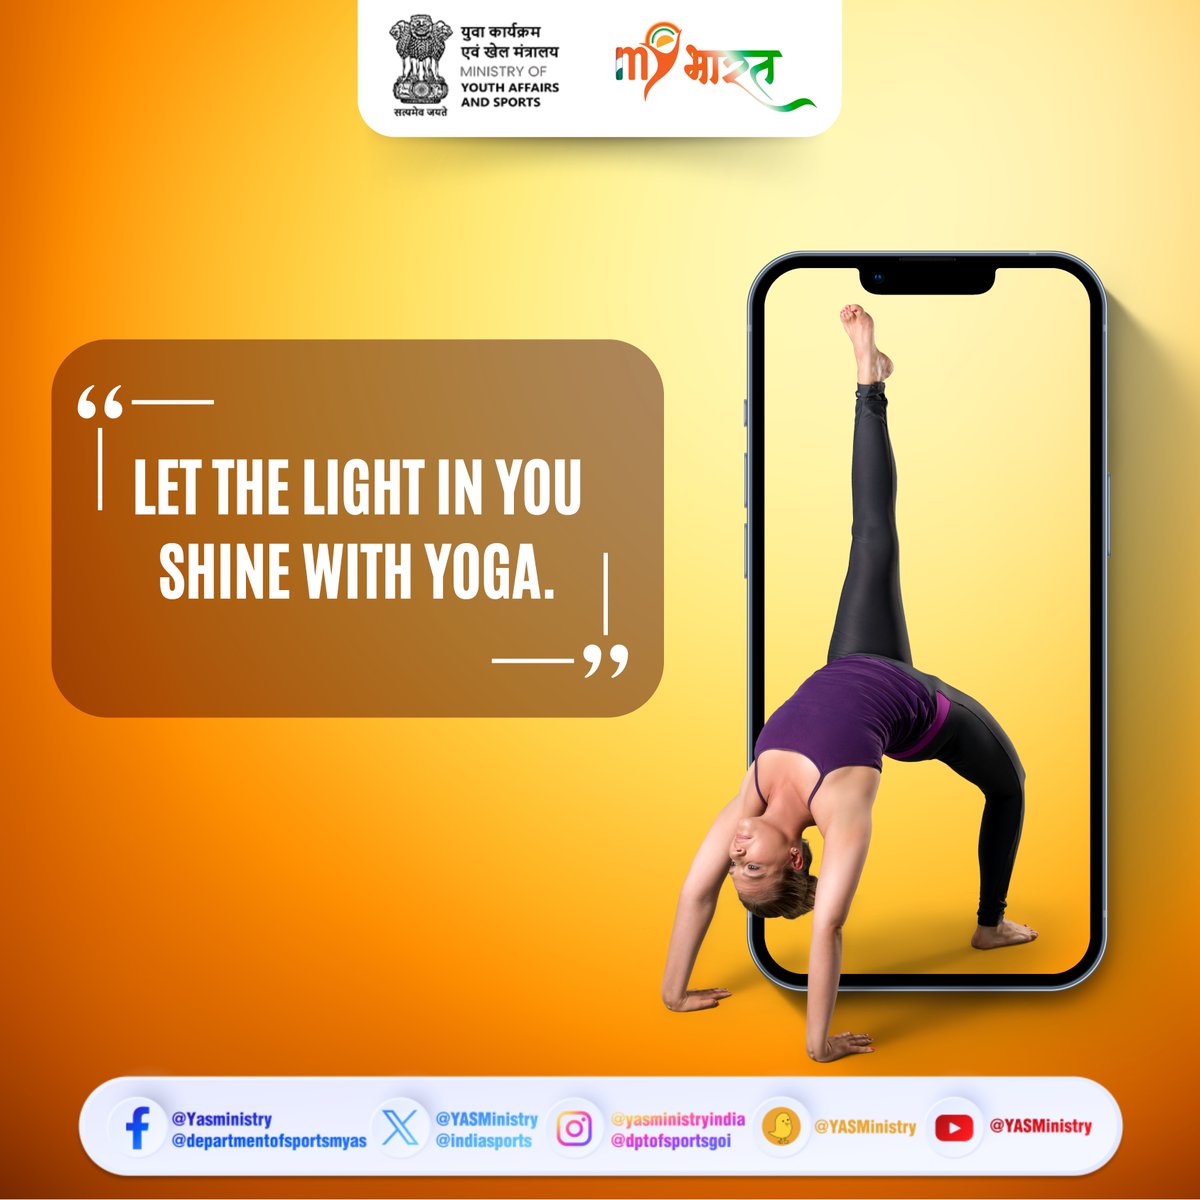 Practicing yoga every day can Illuminate the path within, with every pose a step towards inner transformation! Let your inner light shine through each practice. 🧘‍♀️✨ #YogaEveryday #FitIndia